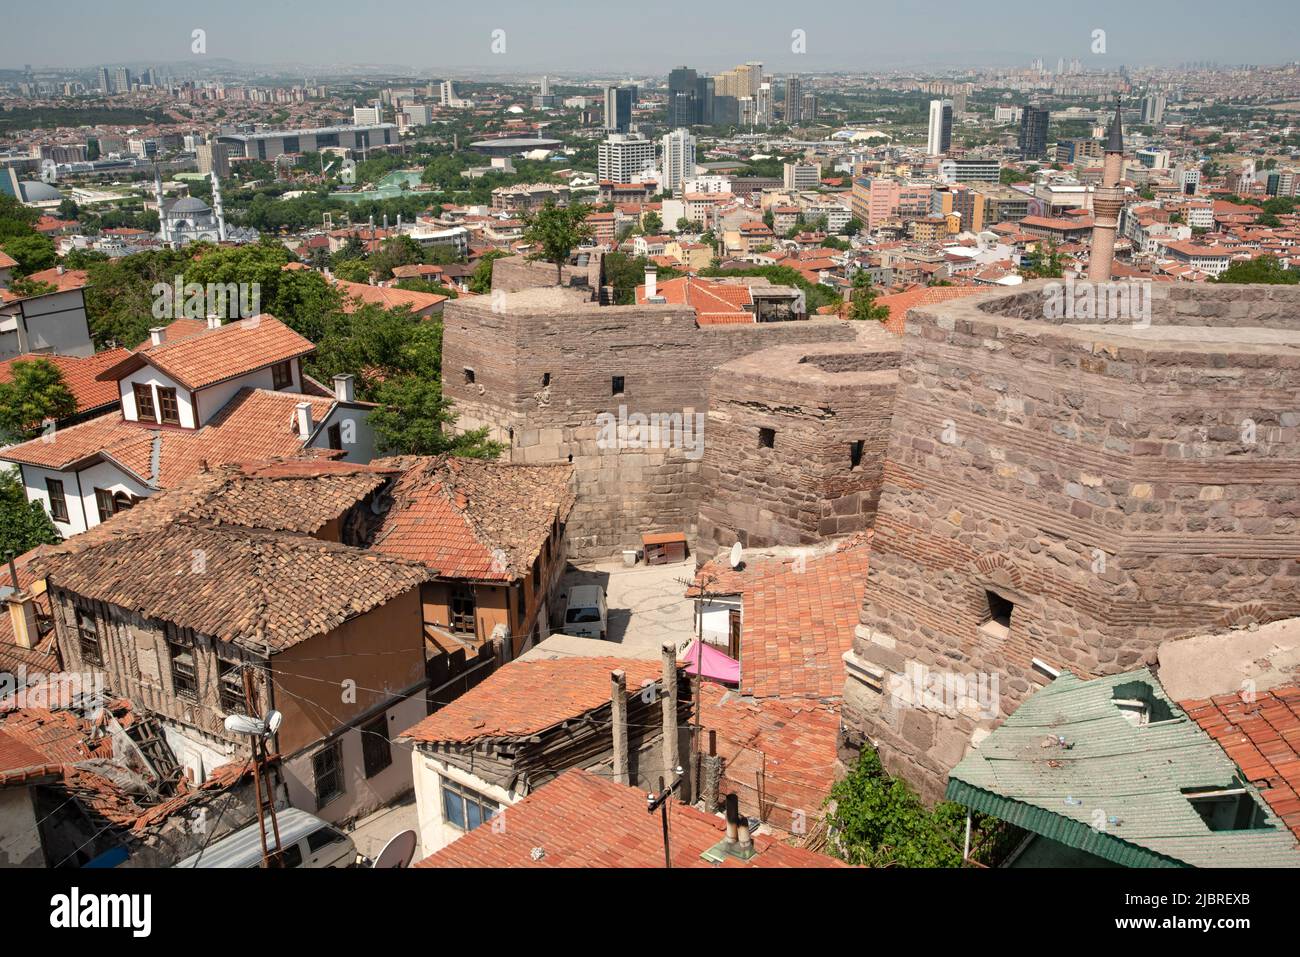 A panoramic view of old and modern houses from the ancient city walls of Ankara castle, Anatolia, Turkey.     Visitors to Ankara castle enjoy a panora Stock Photo